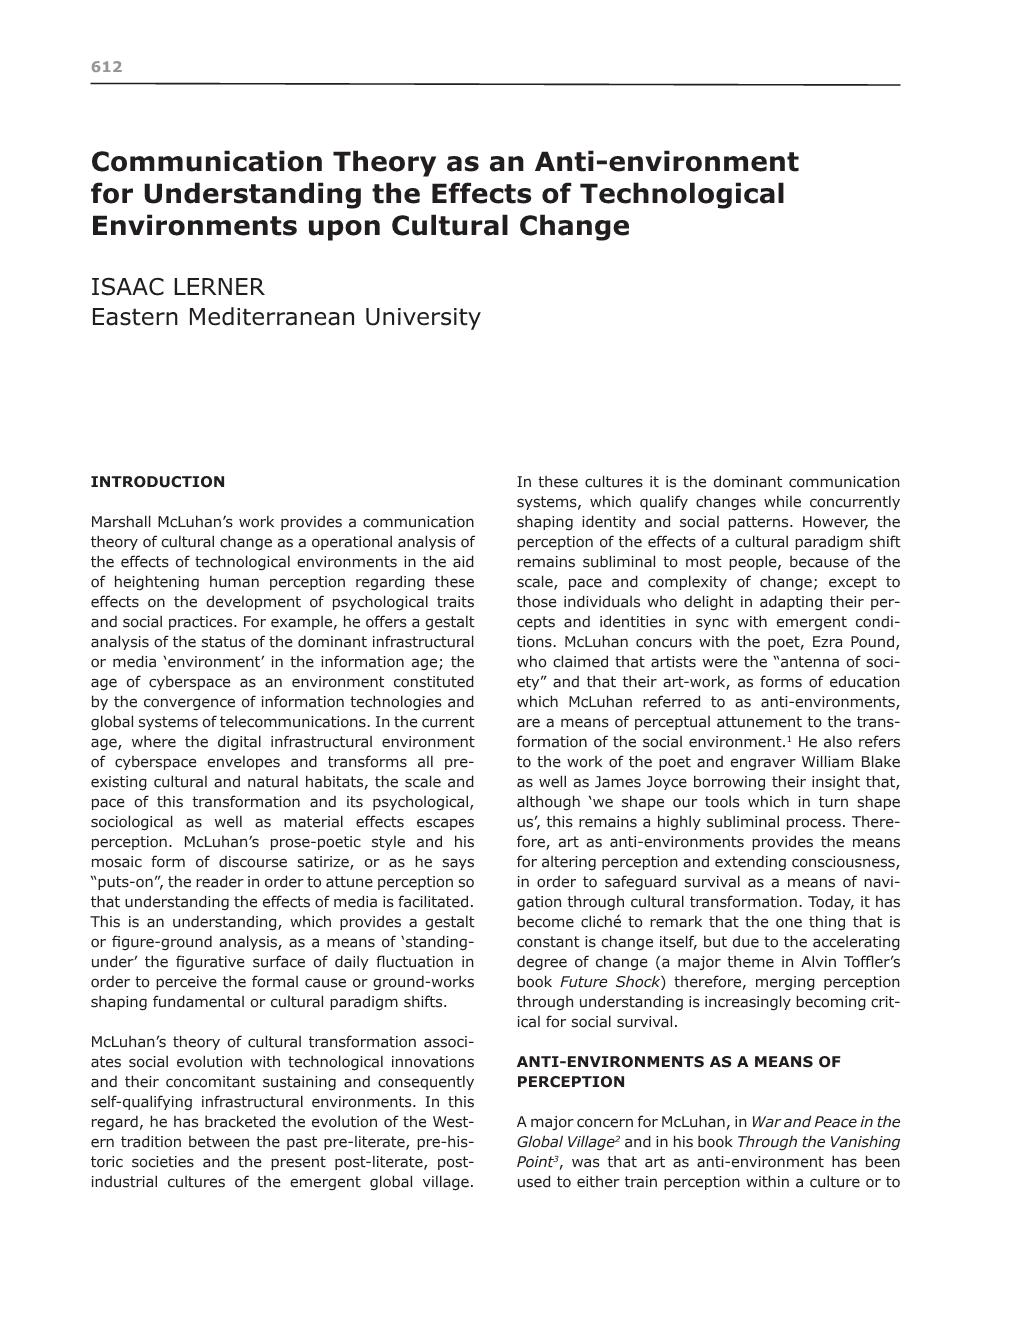 Communication Theory As an Anti-Environment for Understanding the Effects of Technological Environments Upon Cultural Change